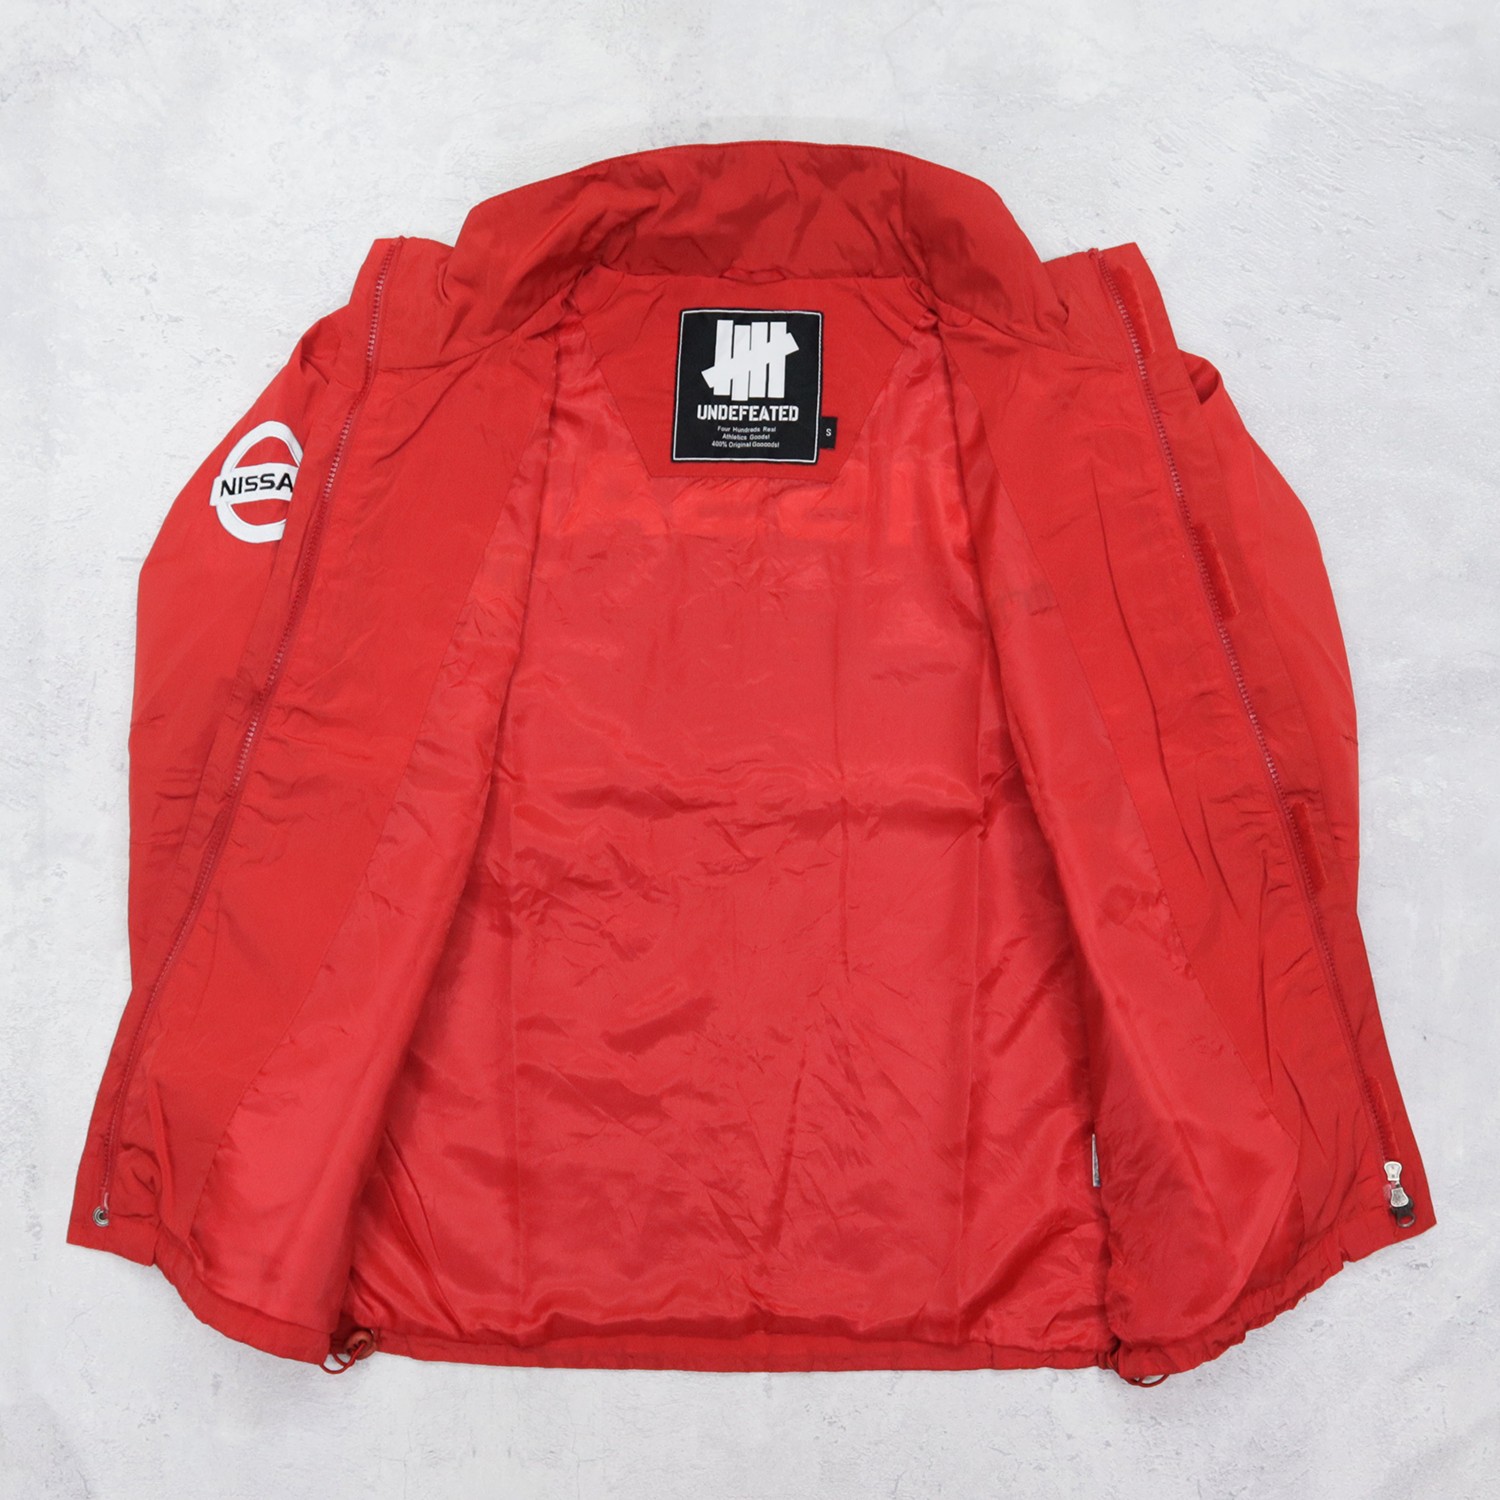 Vintage 90s 00s Y2K NISSAN x UNDEFEATED Embroidered Big Logo Spellout Bomber Worker Jacket - 5